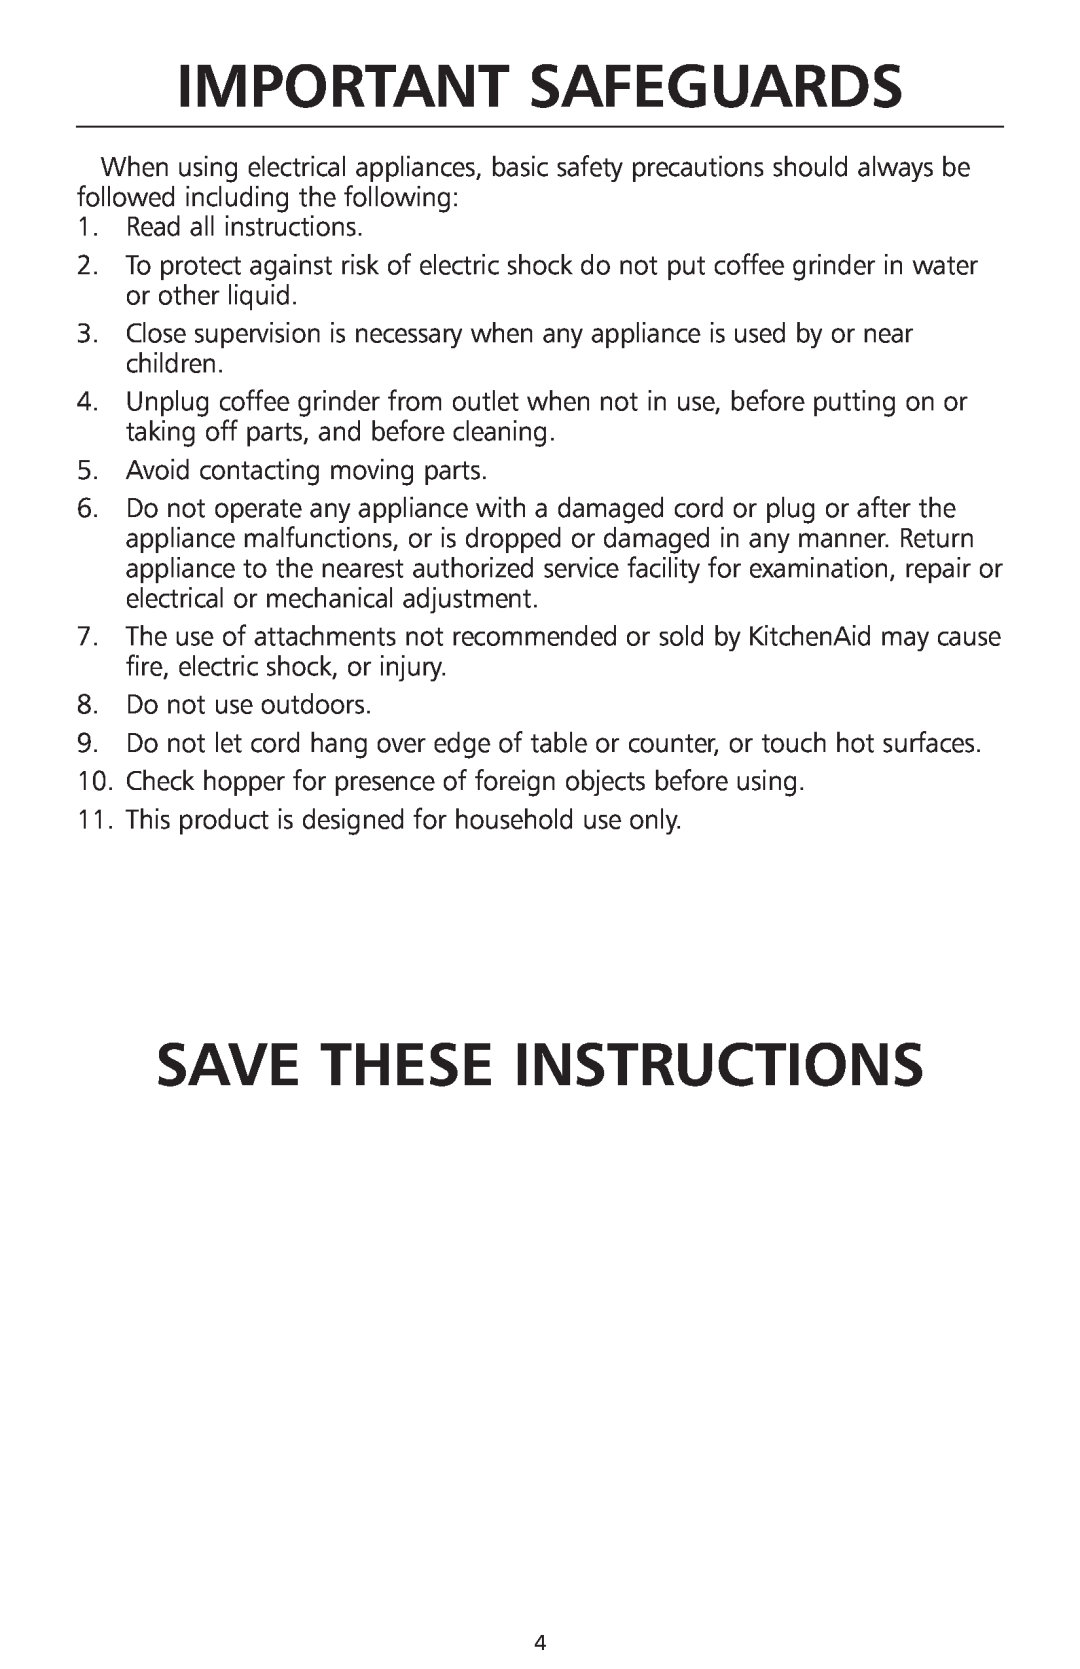 KitchenAid 2633 manual Important Safeguards, Save These Instructions 